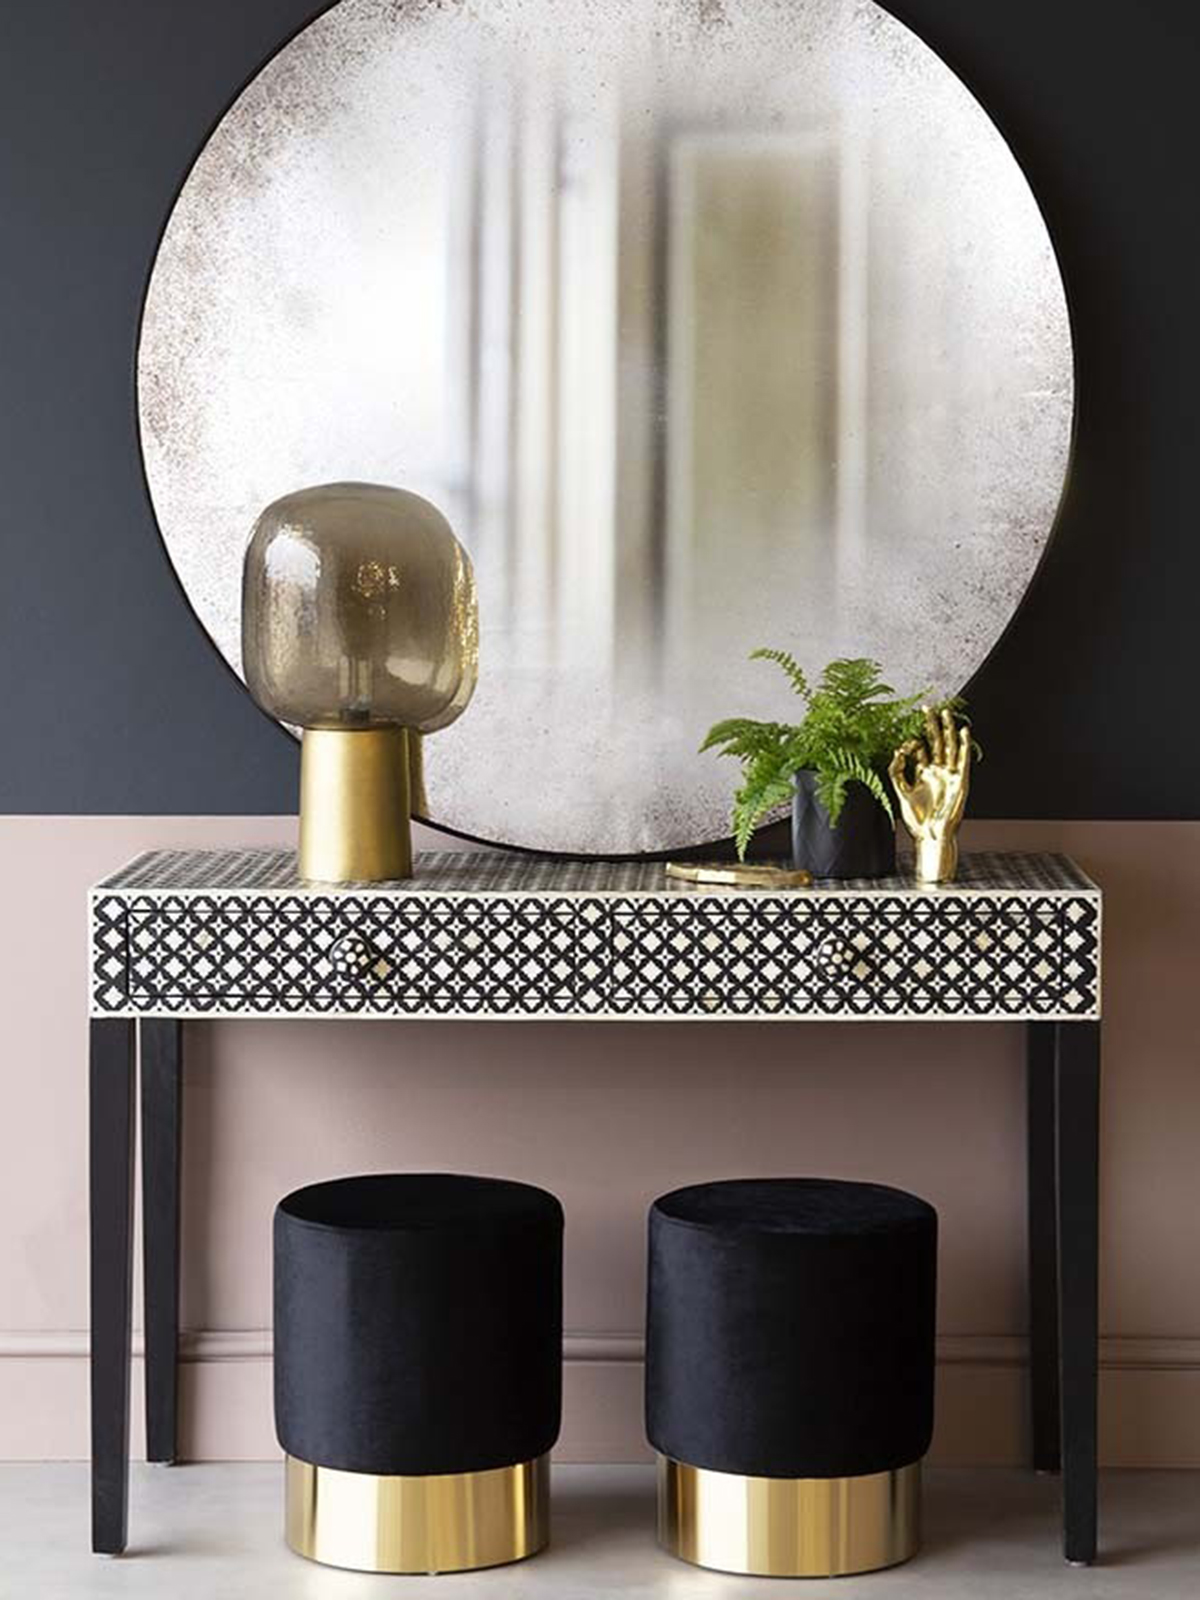 Interior Designer Sophie Robinson advises on how to make small spaces appear bigger. Reflective surfaces will bounce the light around the room, which helps to make it feel lighter and more spacious